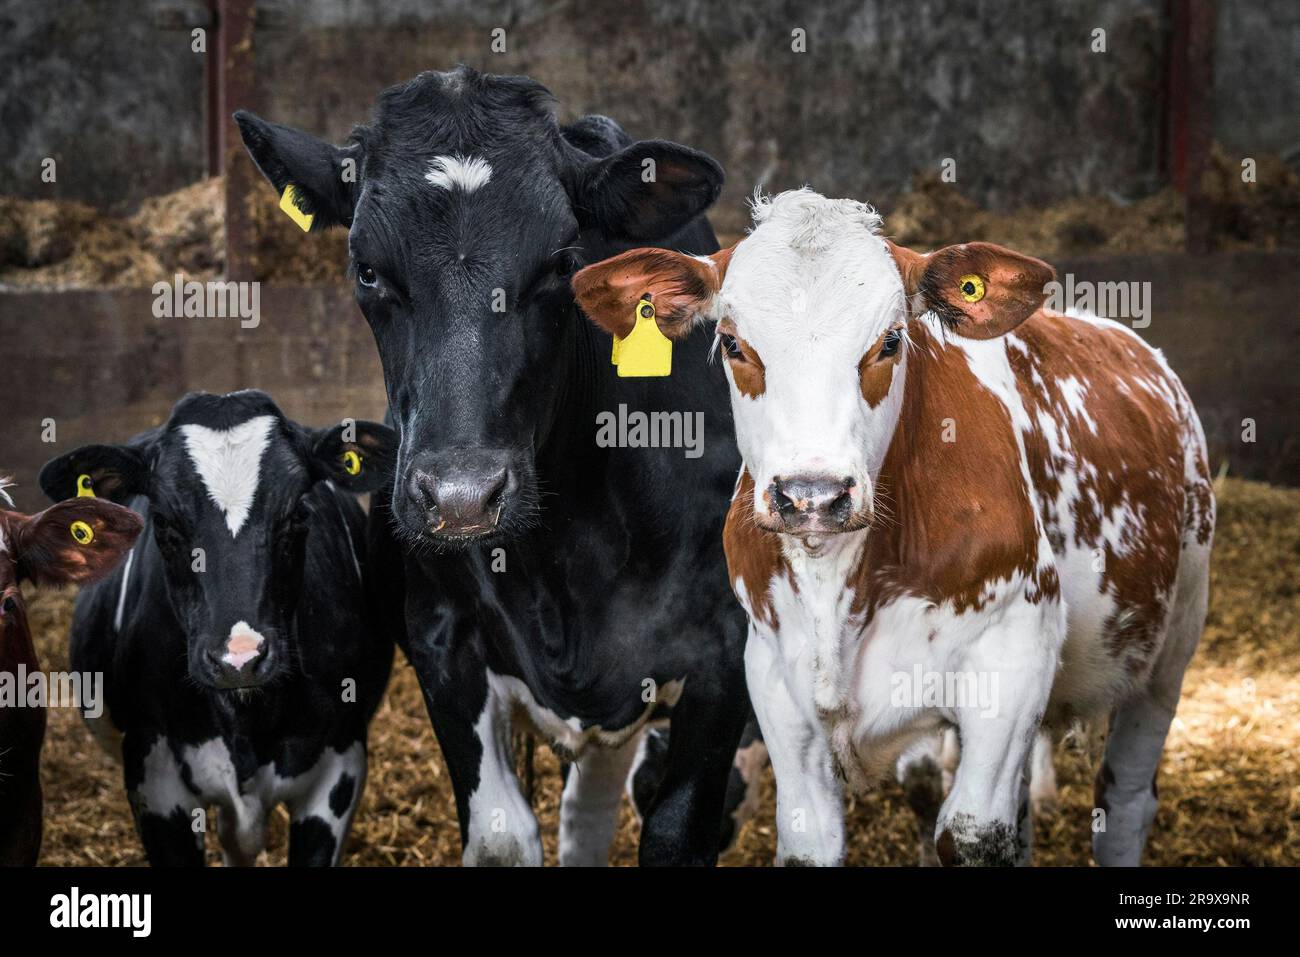 Curious cows looking at you in a stable with dirt in a rural farm environment Stock Photo